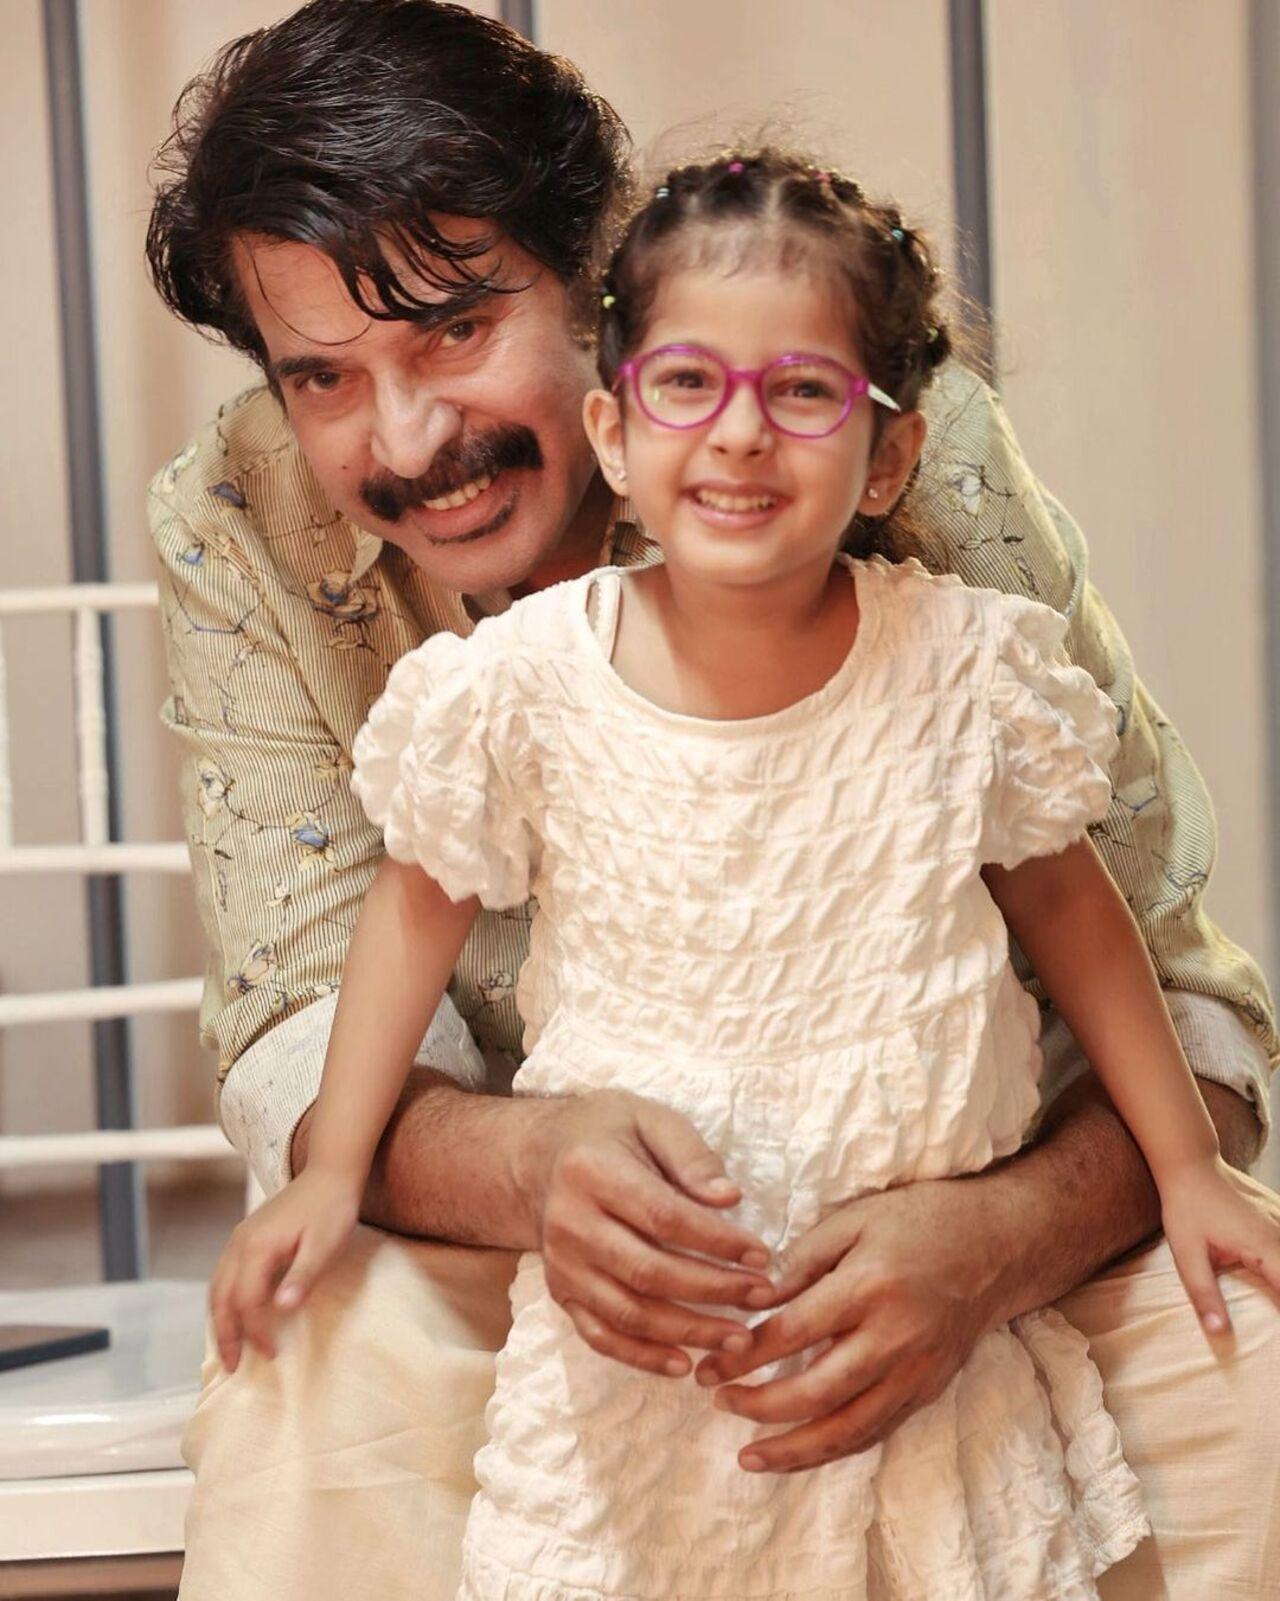 Mammootty never posts pictures with family on his Instagram feed but makes an exception when it comes to his granddaughter, Maryam